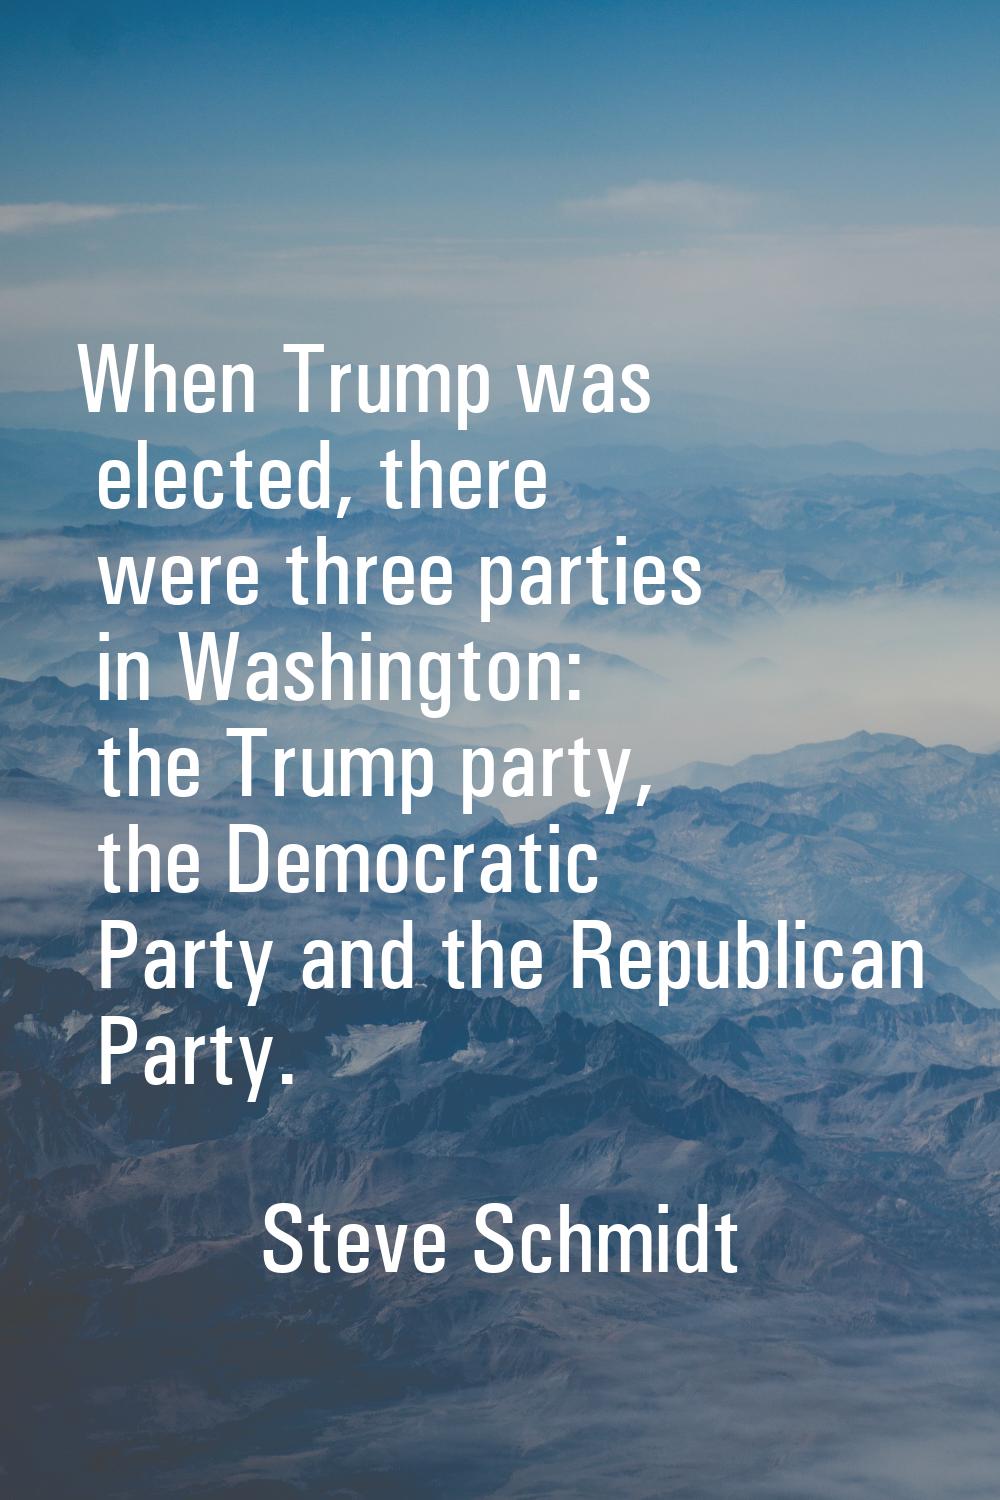 When Trump was elected, there were three parties in Washington: the Trump party, the Democratic Par